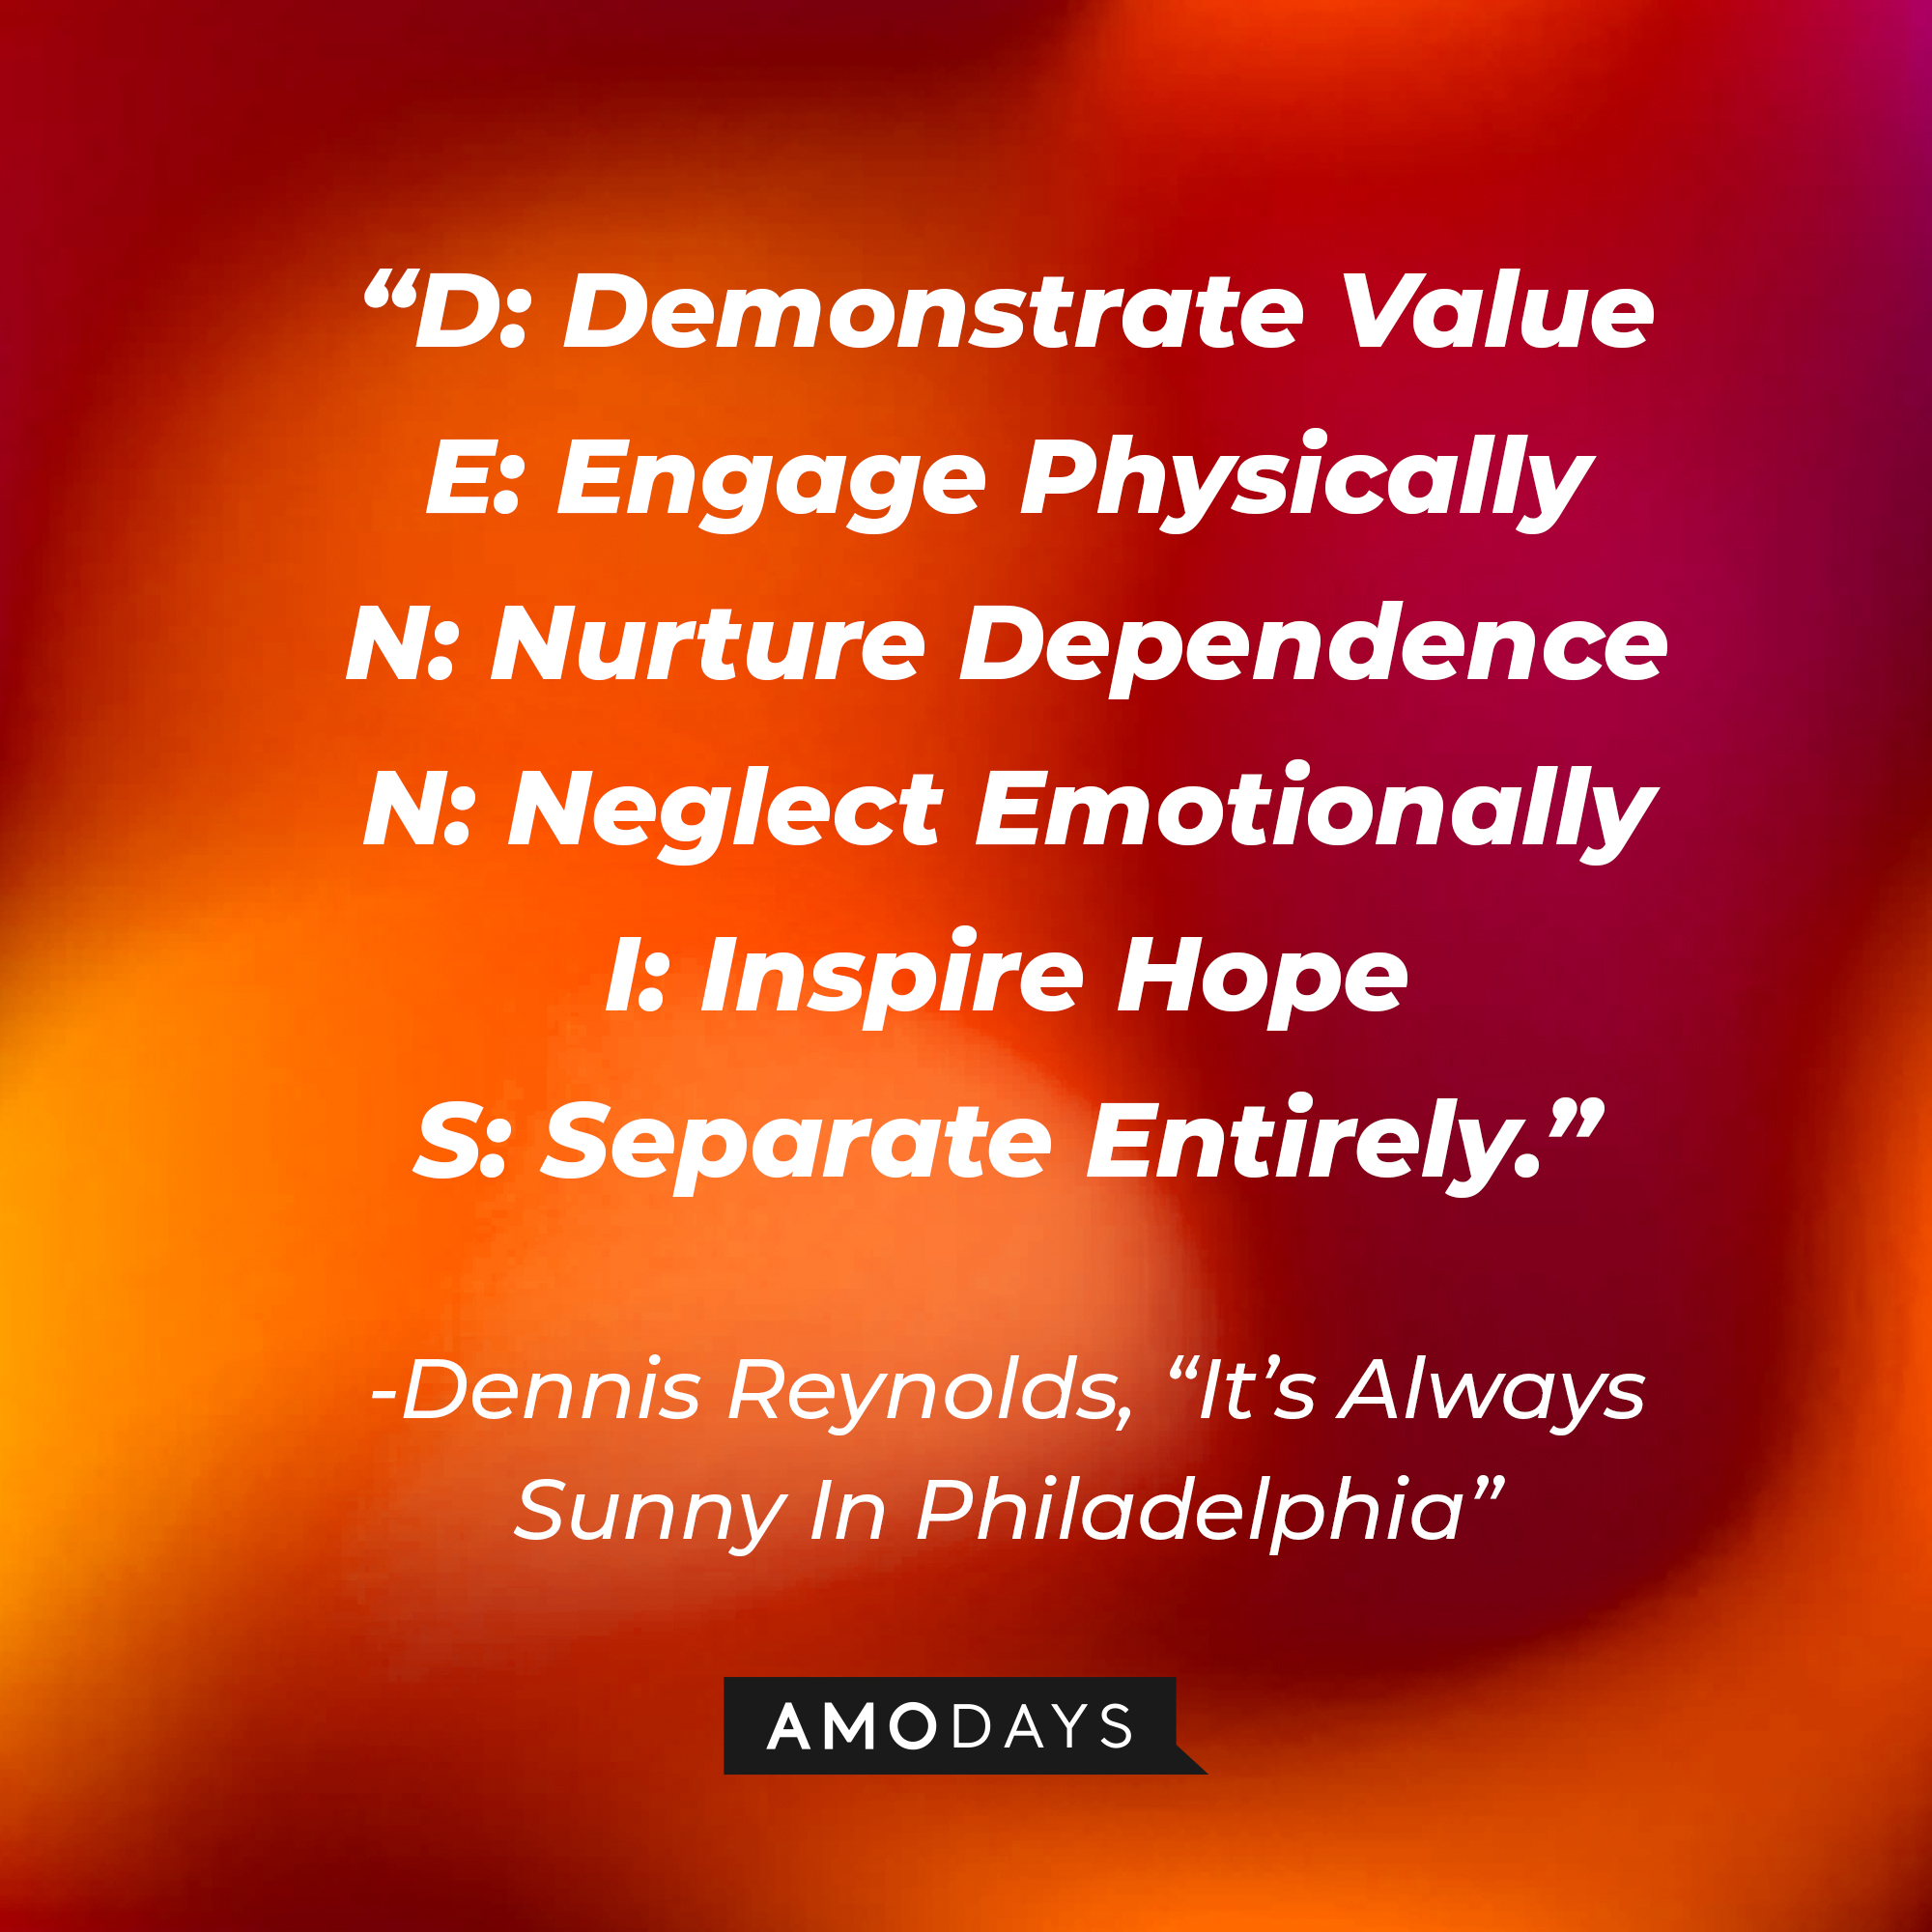 Dennis Reynolds’ quote from "It’s Always Sunny In Philadelphia": “D: Demonstrate Value E: Engage Physically N: Nurture Dependence N: Neglect Emotionally I: Inspire Hope S: Separate Entirely.” | Source: AmoDays